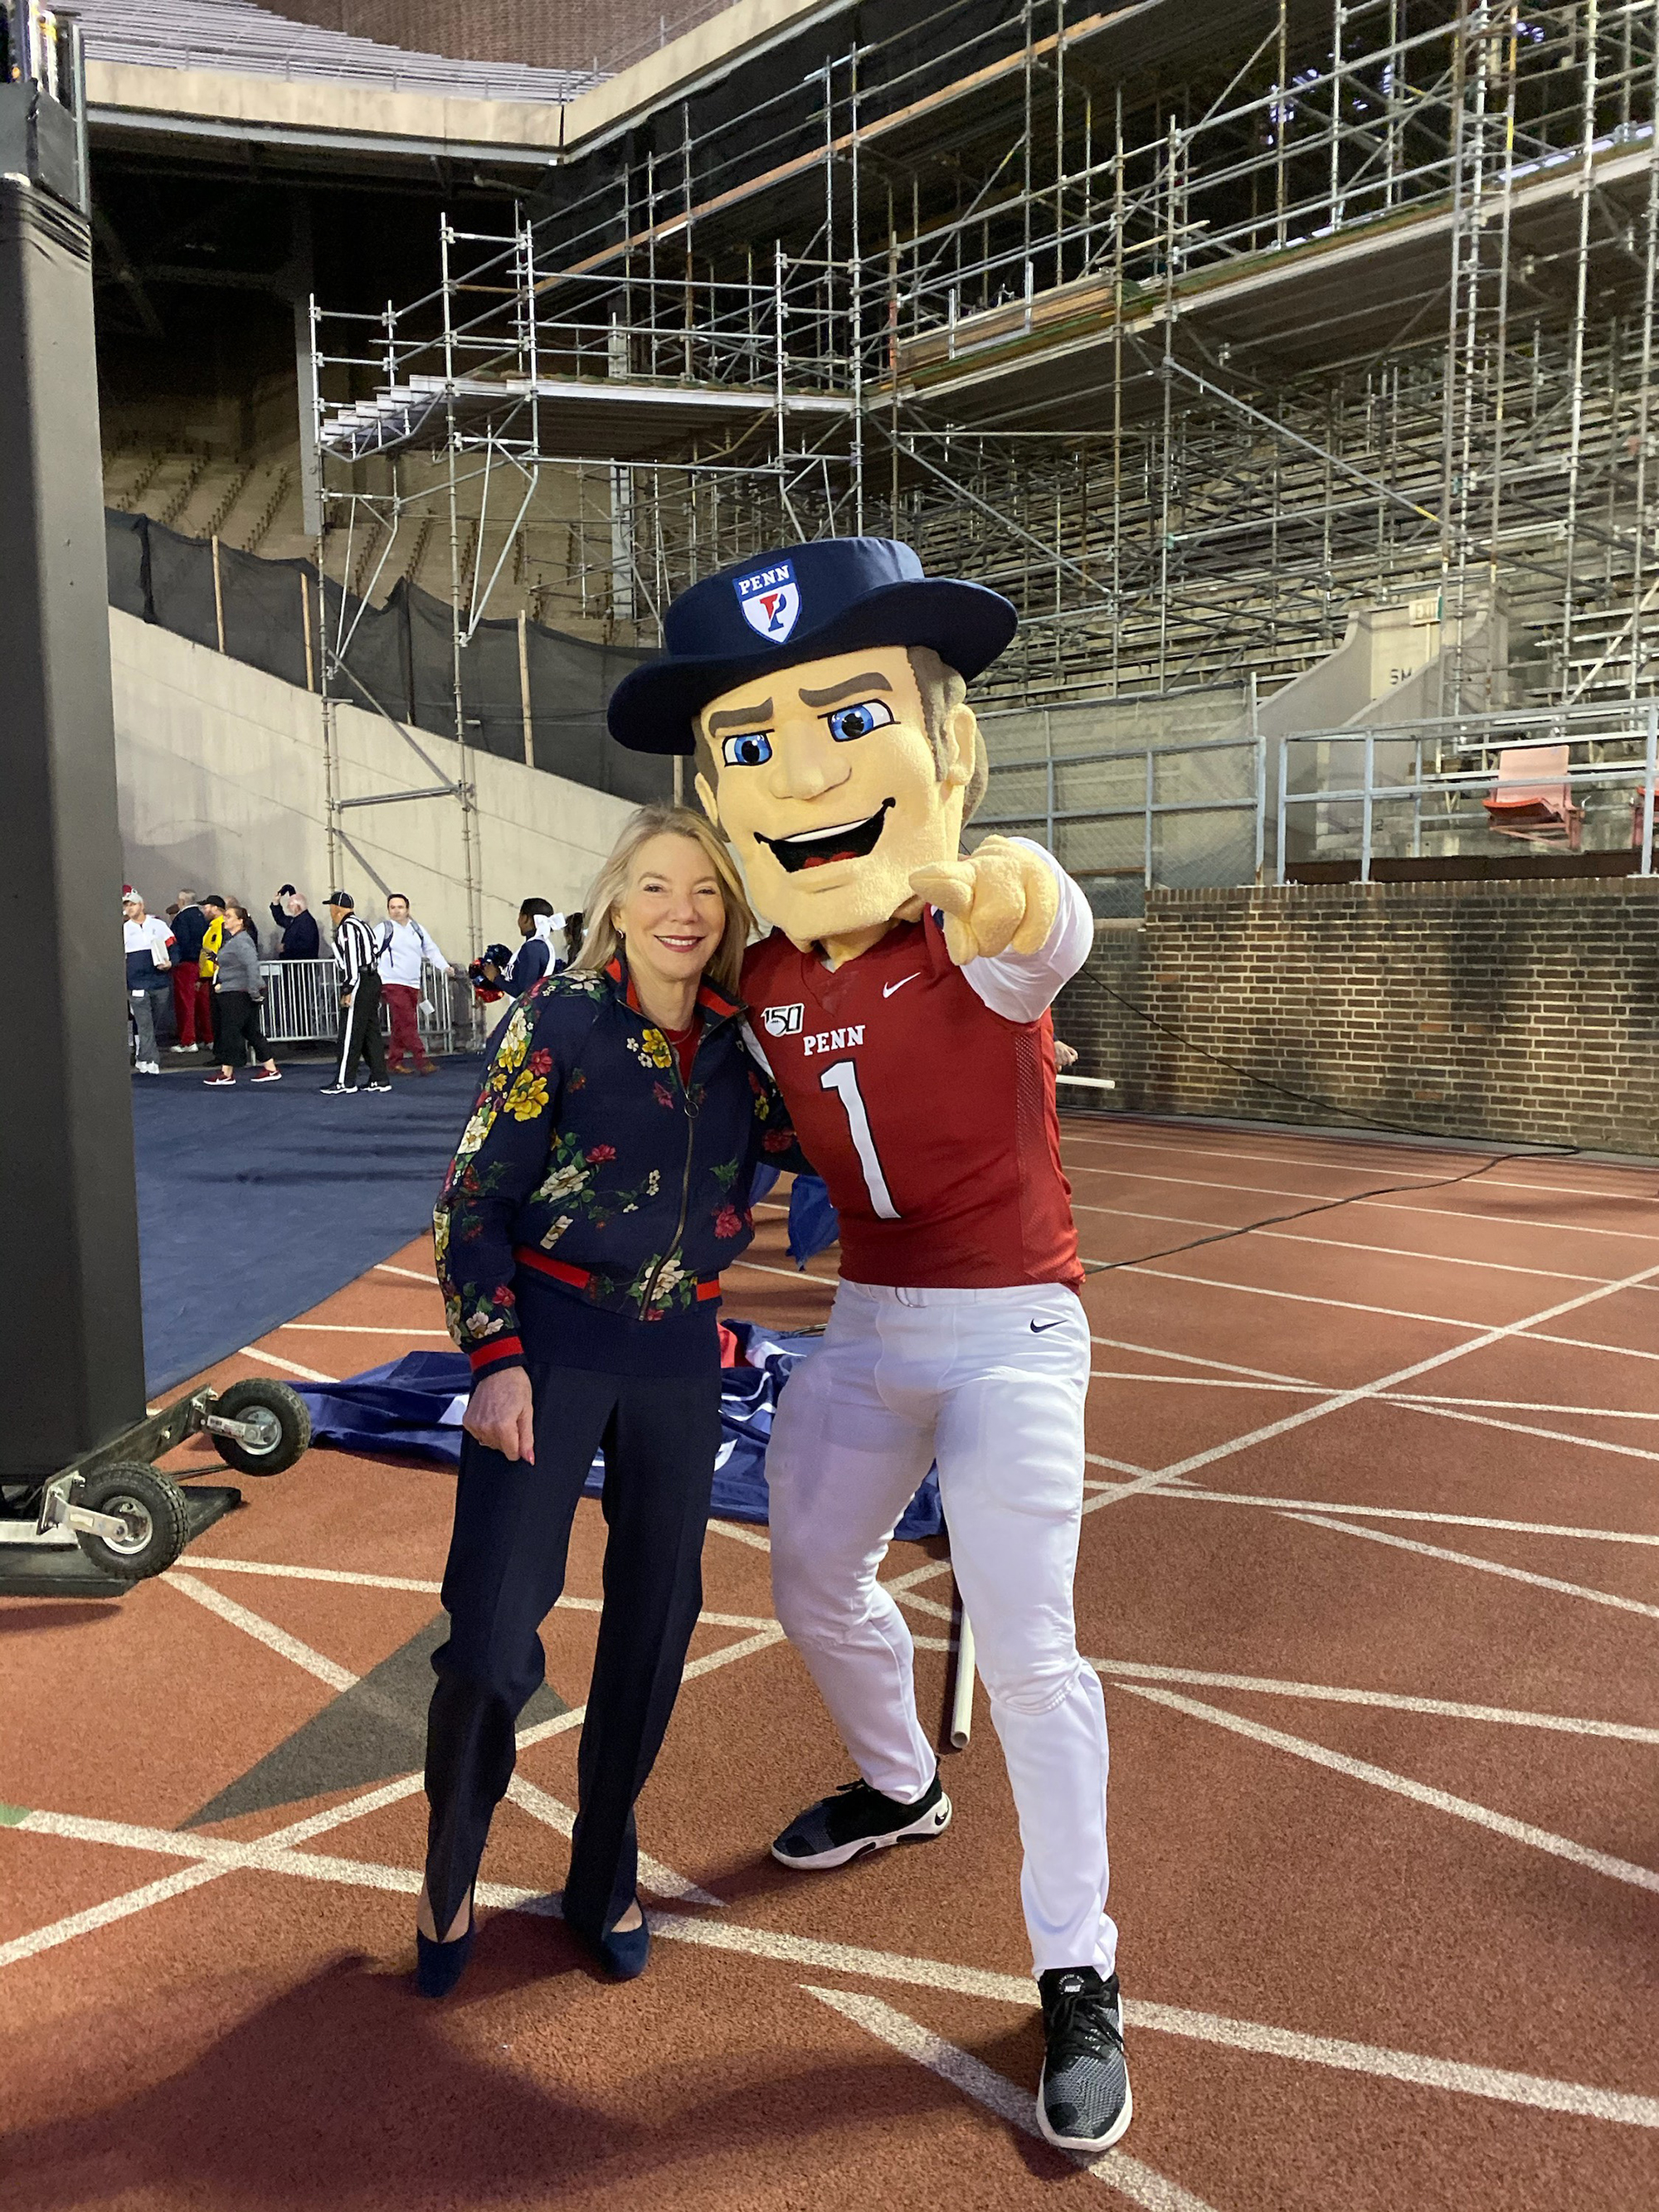 President Amy Gutmann poses with the Quaker on Friday at Franklin Field.